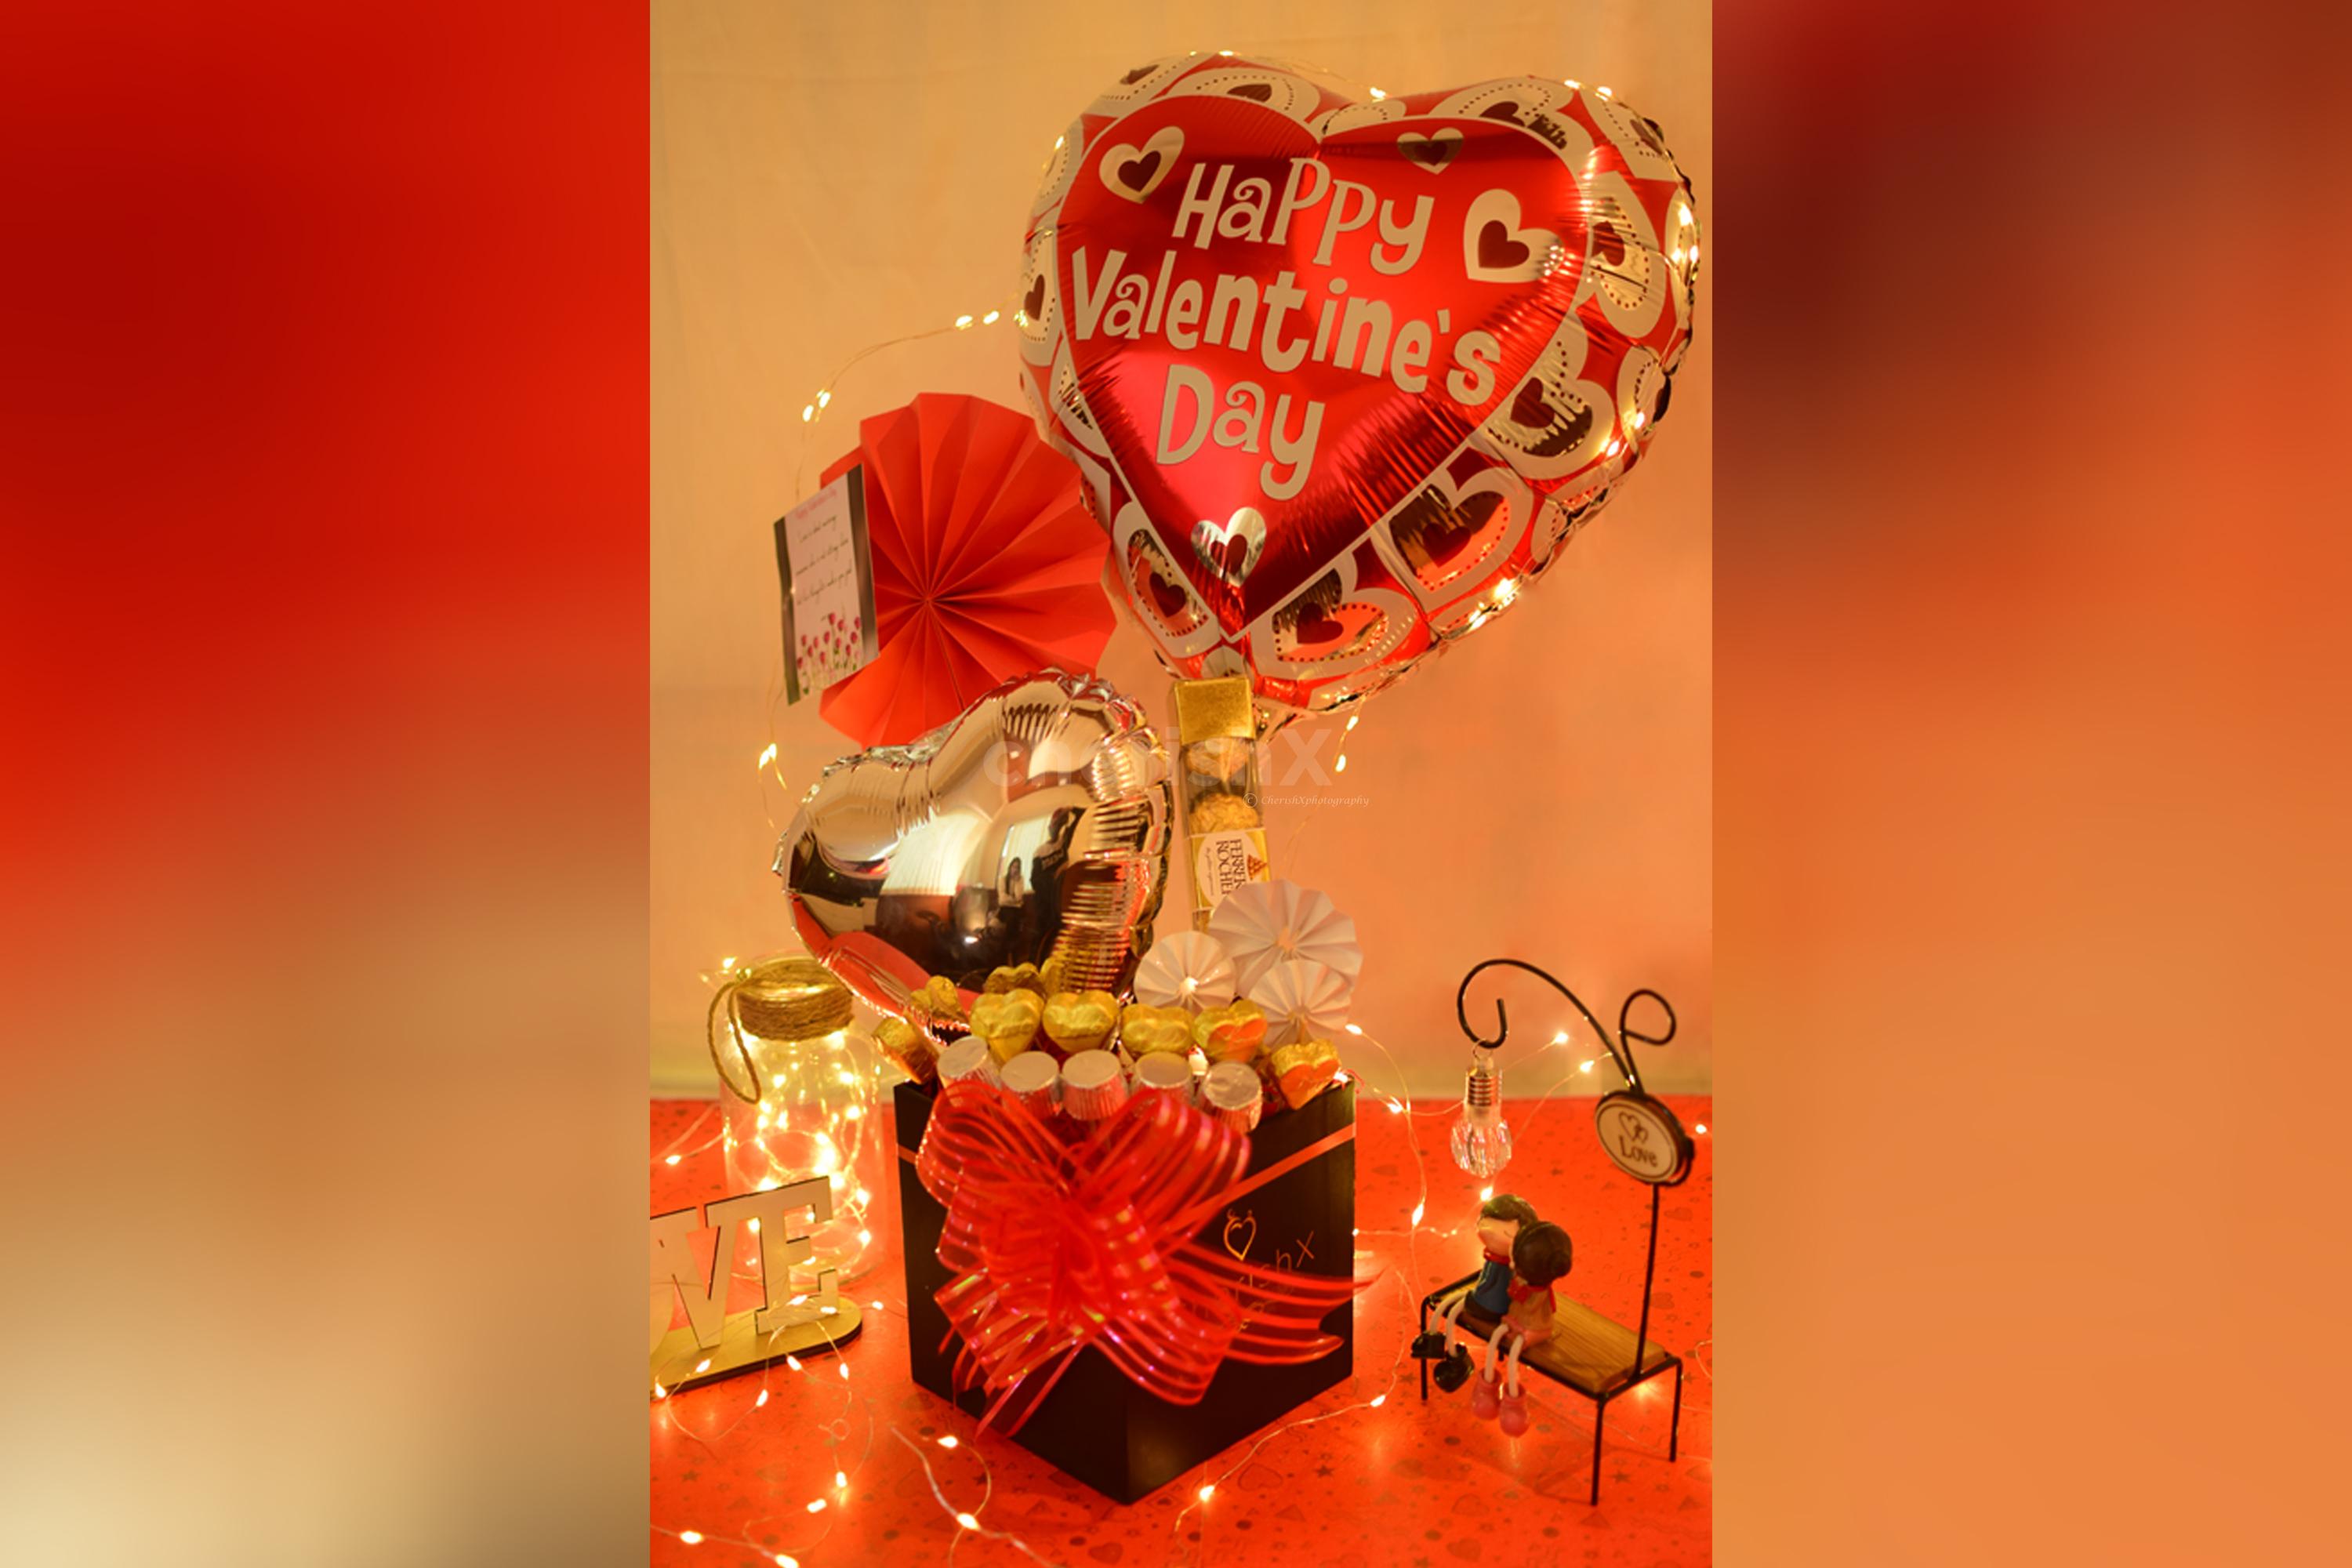 Make your partner’s heart filled with love by booking CherishX's Valentine's Day Bucket!